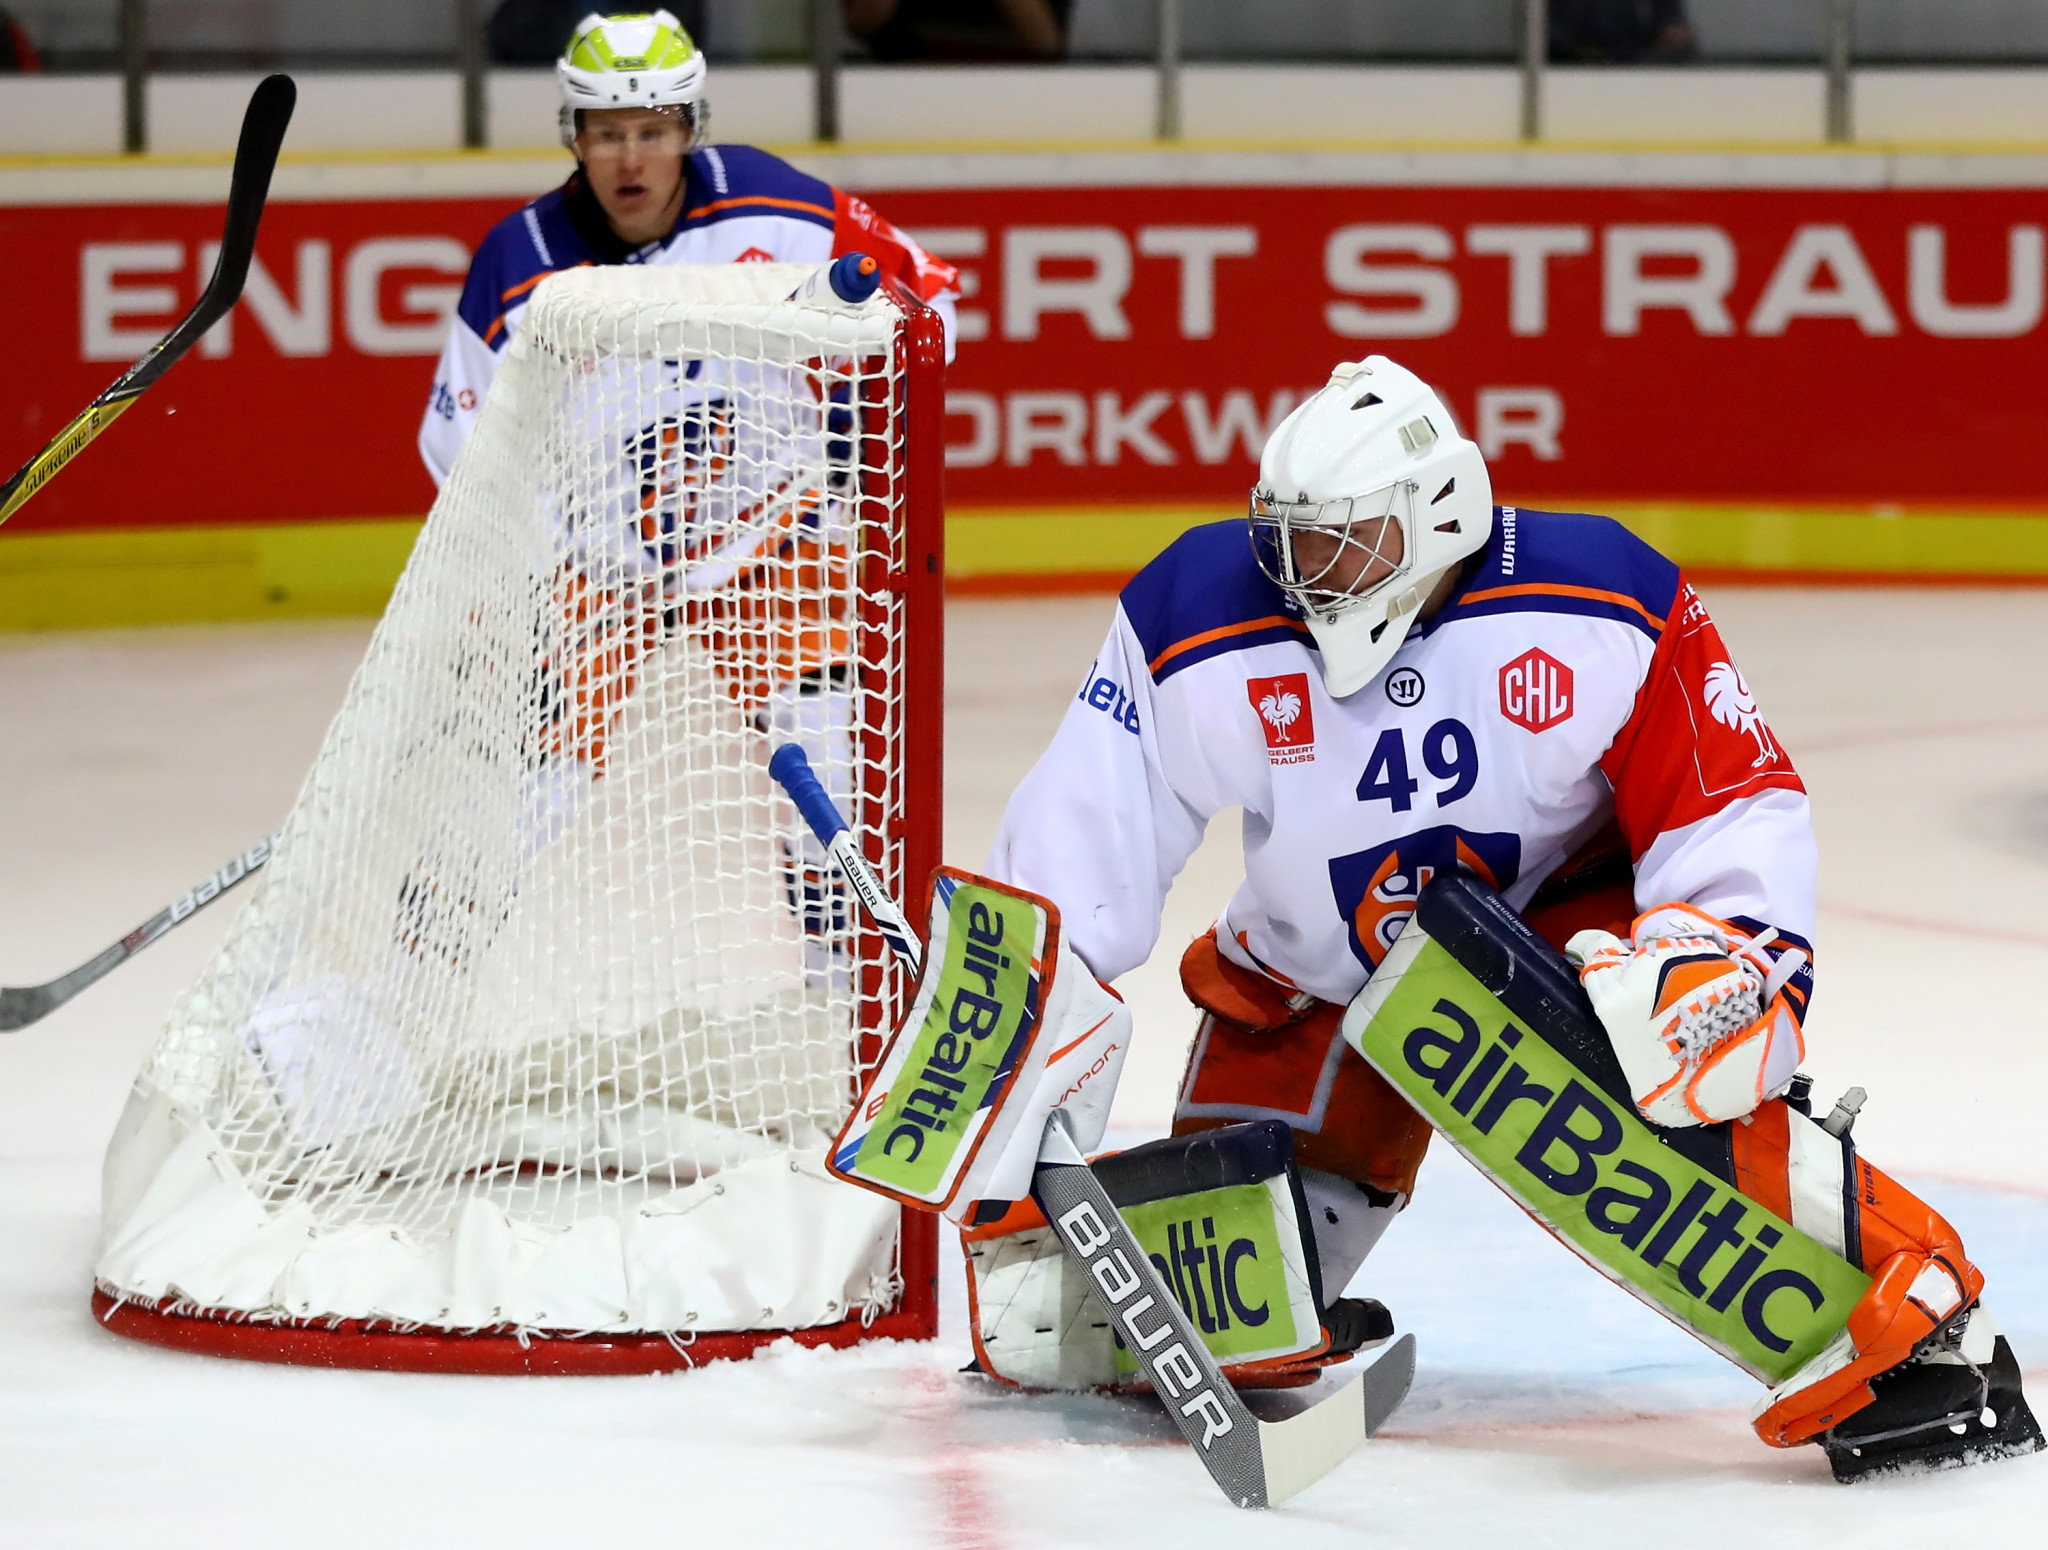 The Champions Hockey League attracts the top teams from across Europe ©Getty Images